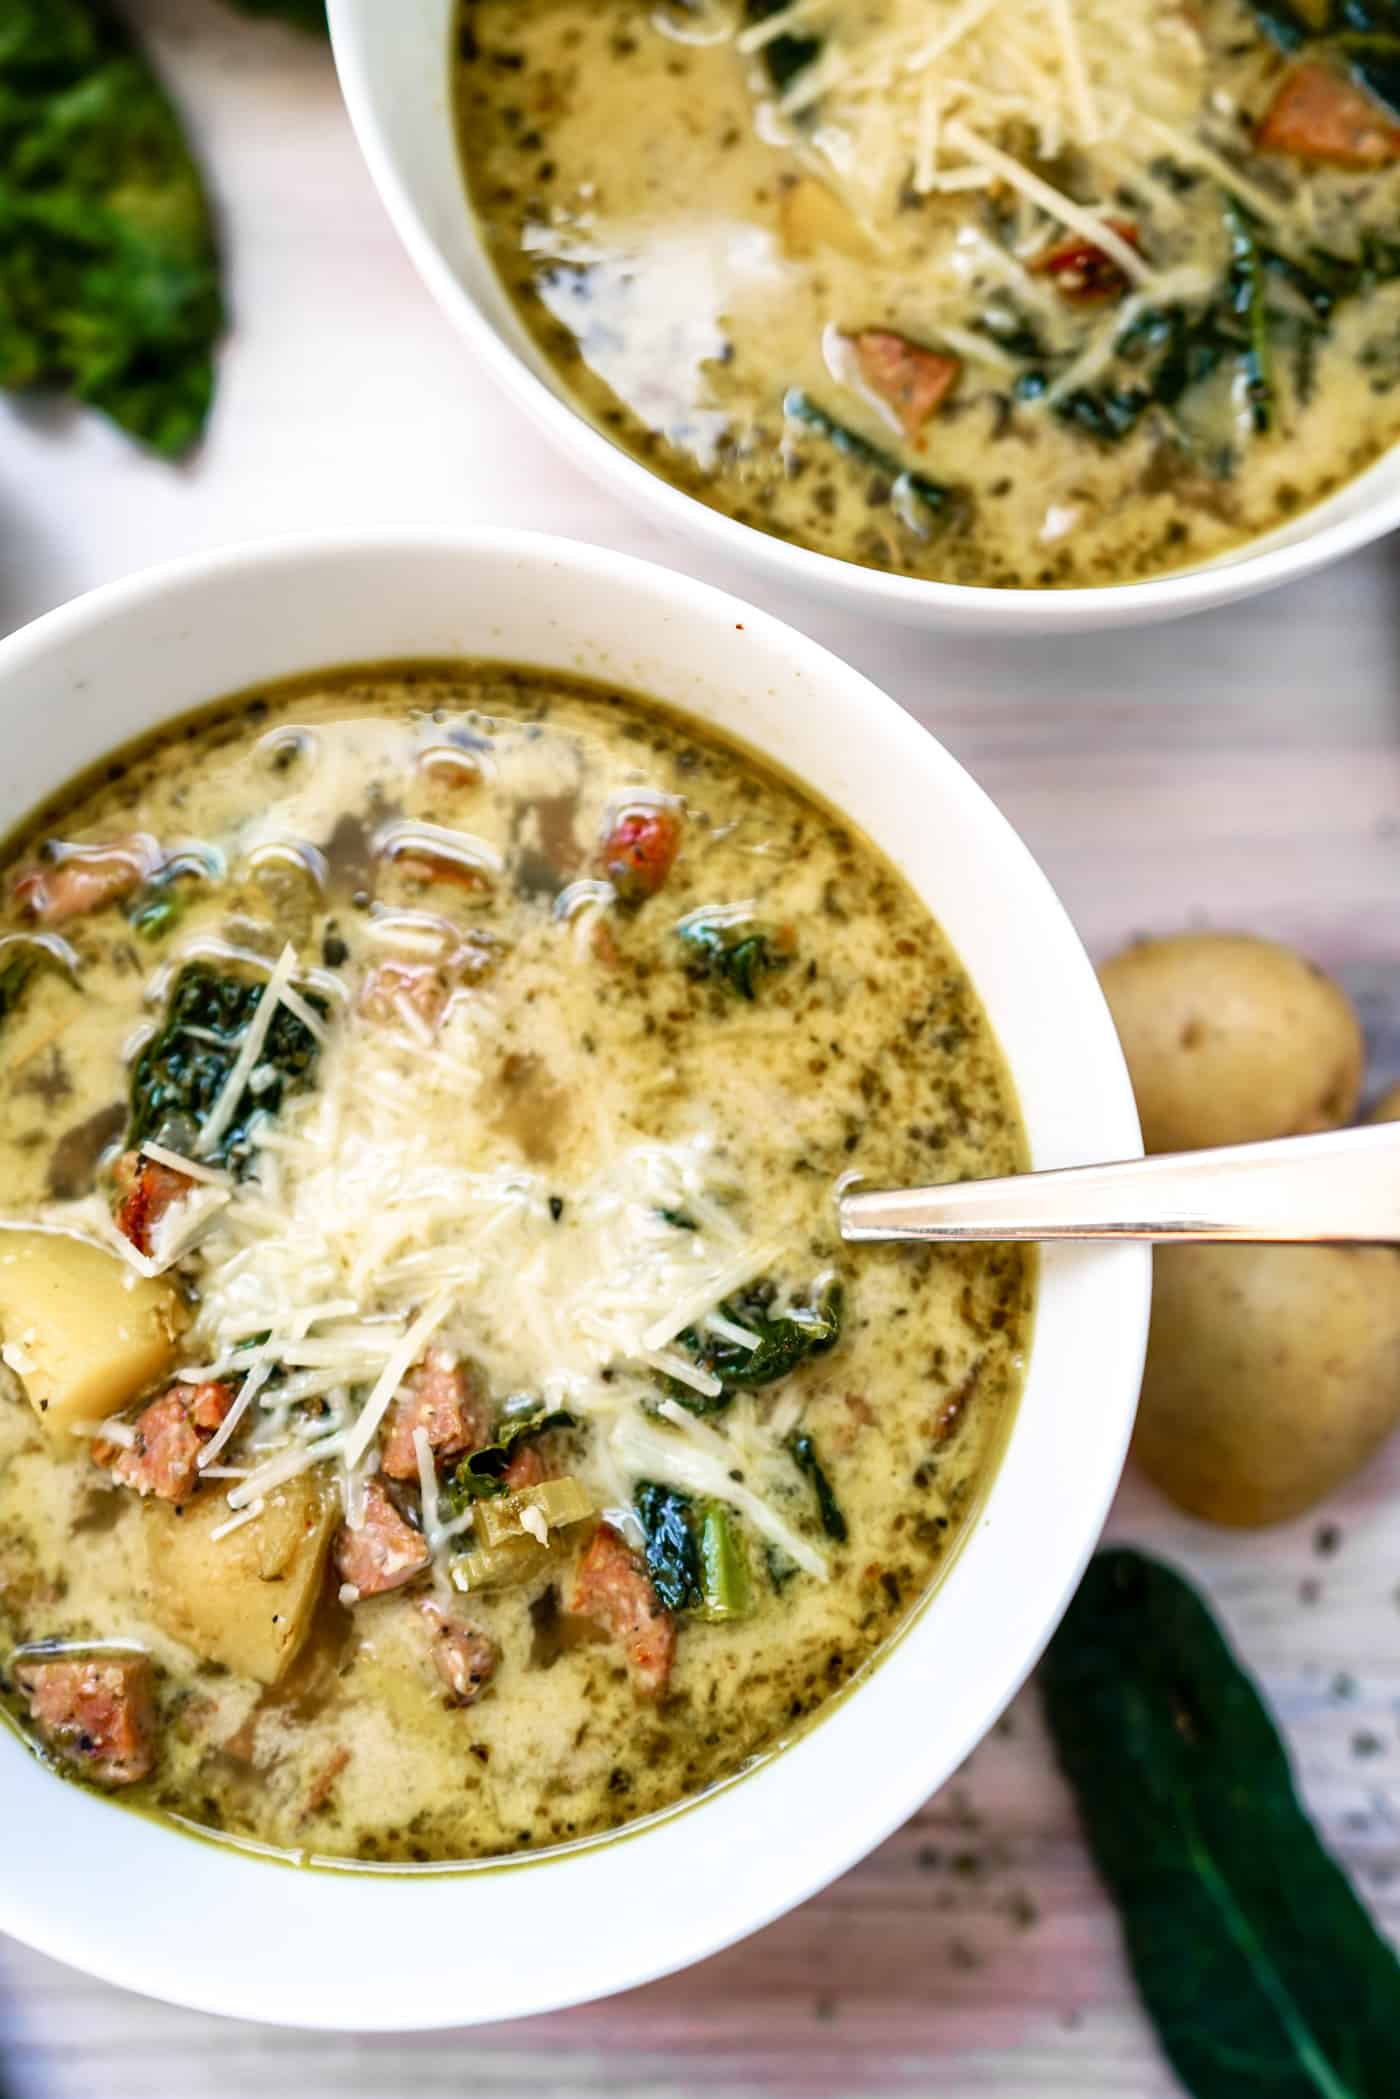 A Lily Love Affair shares an easy recipe for Instant Pot Zuppa Toscana soup with kale and parmesan cheese